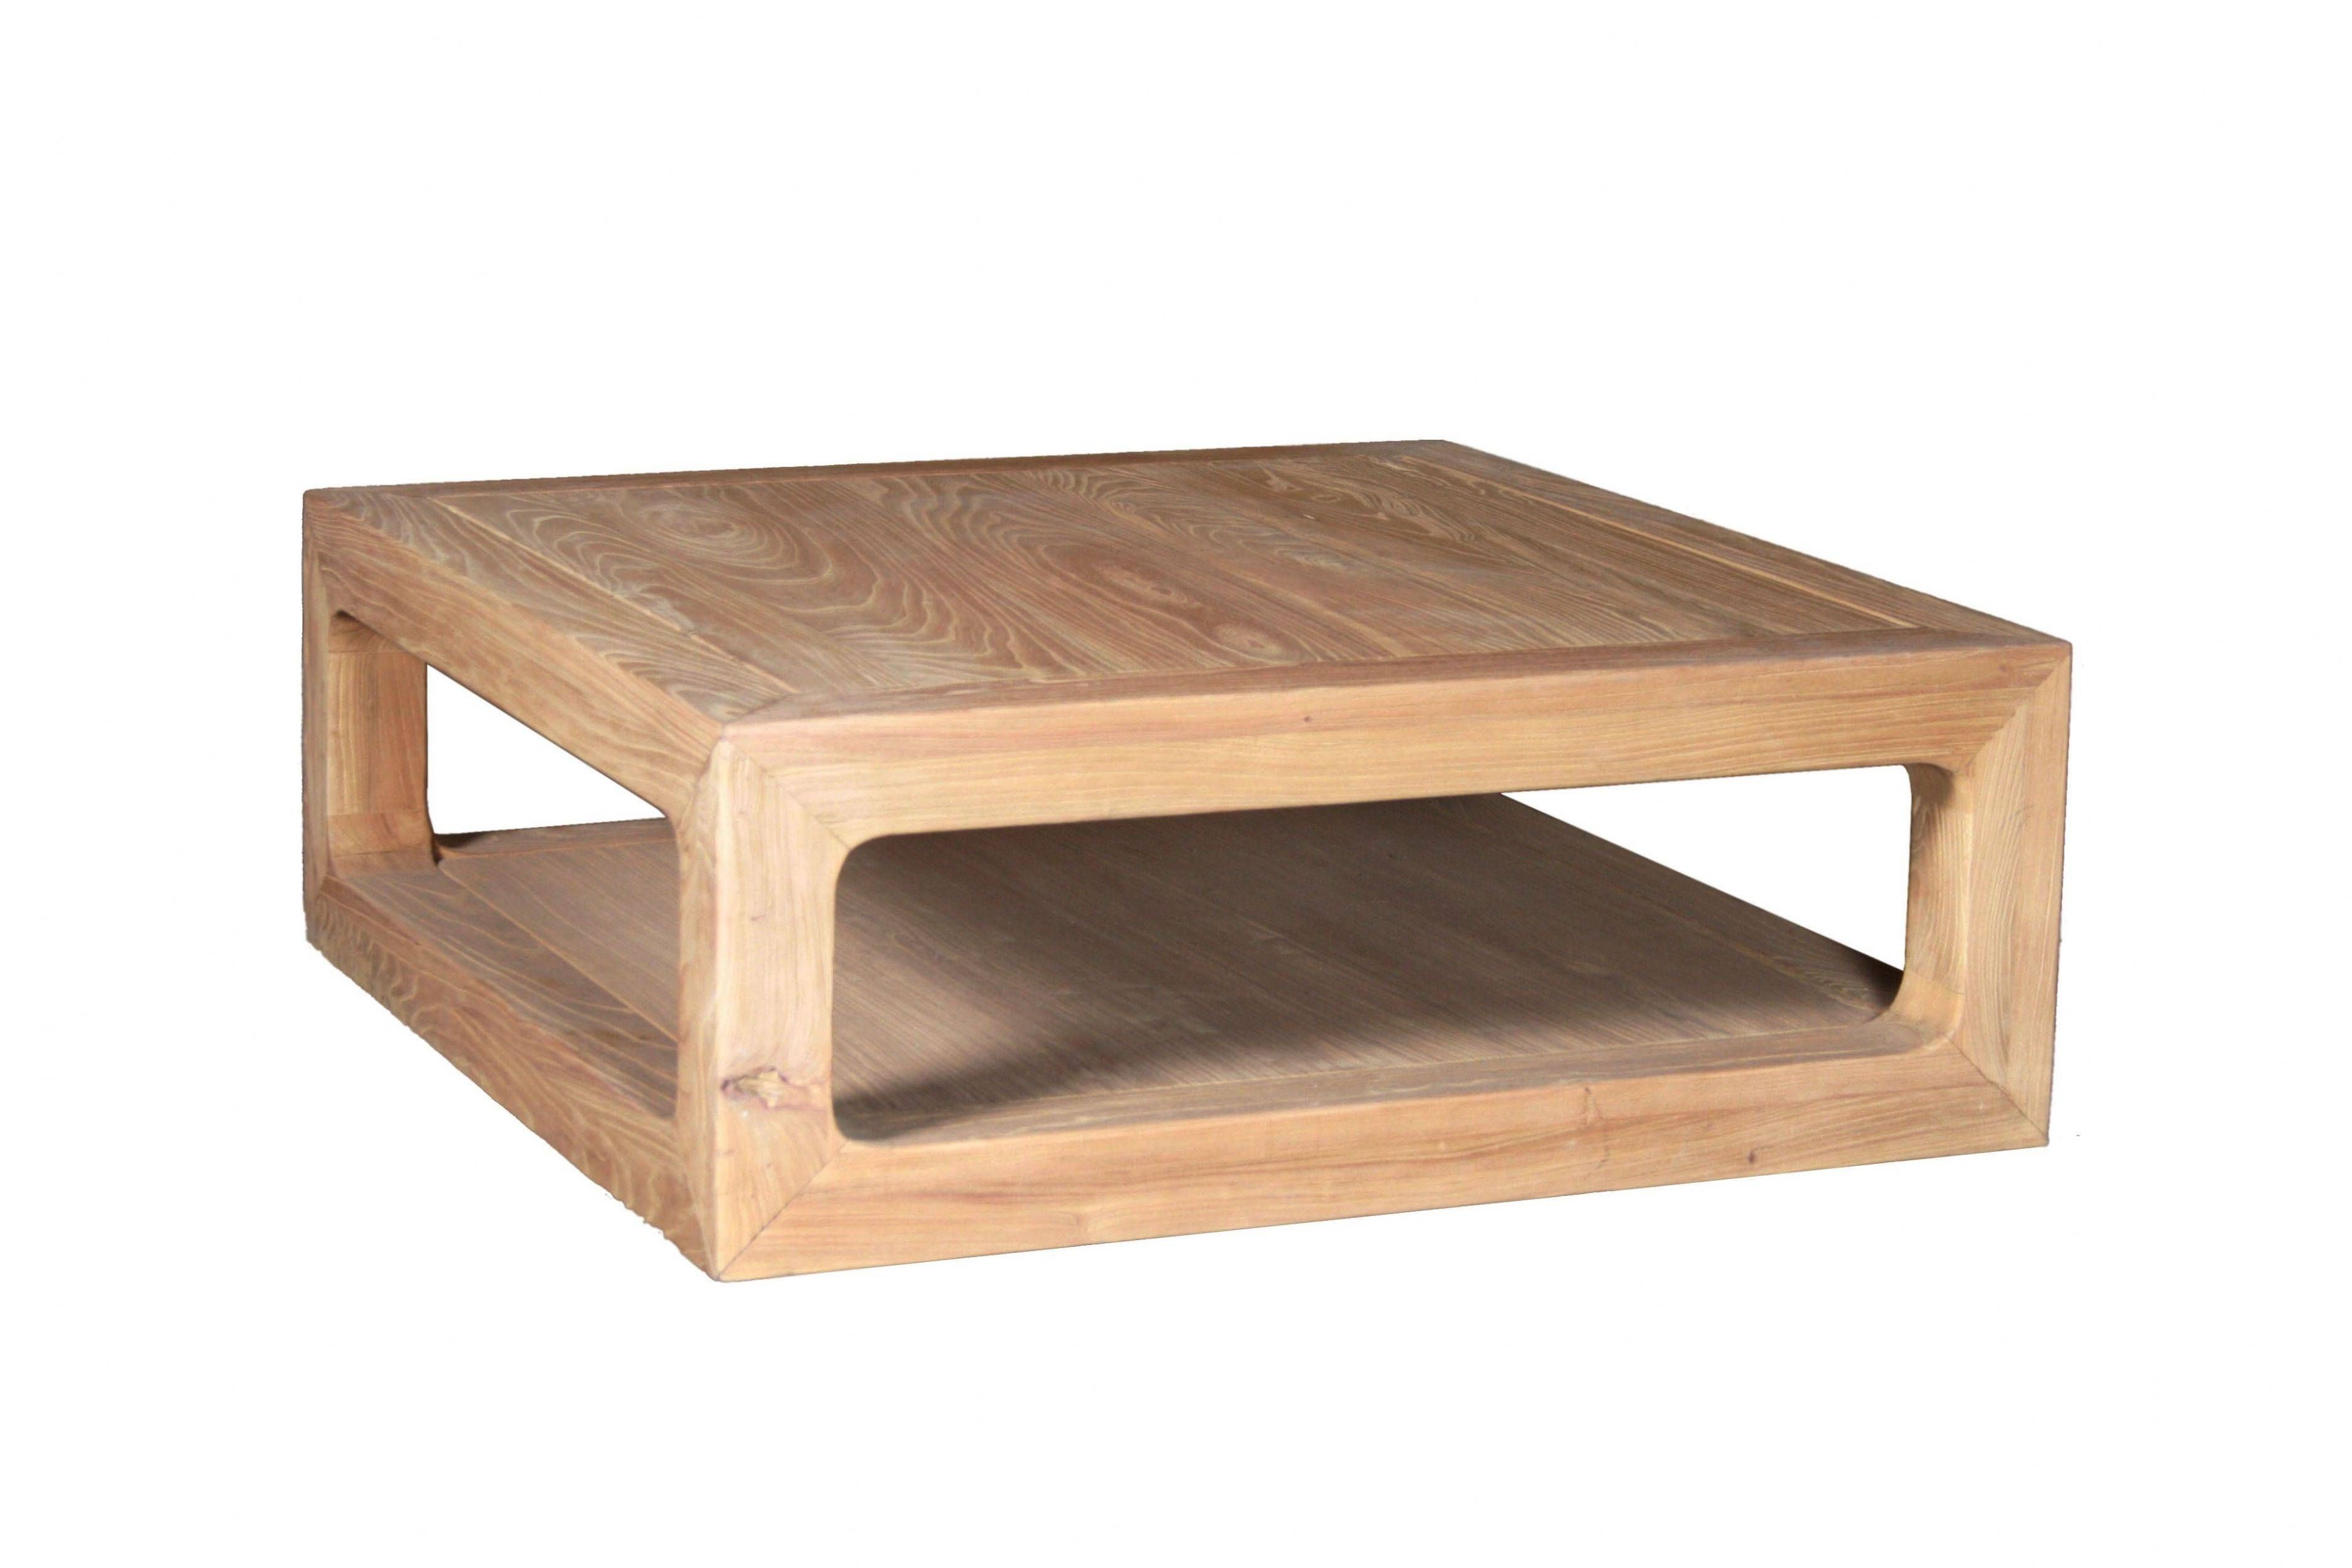 Reclaimed Wooden Coffee Table Contemporary Wooden Coffee Tables Regarding Oak Square Coffee Tables (View 17 of 30)